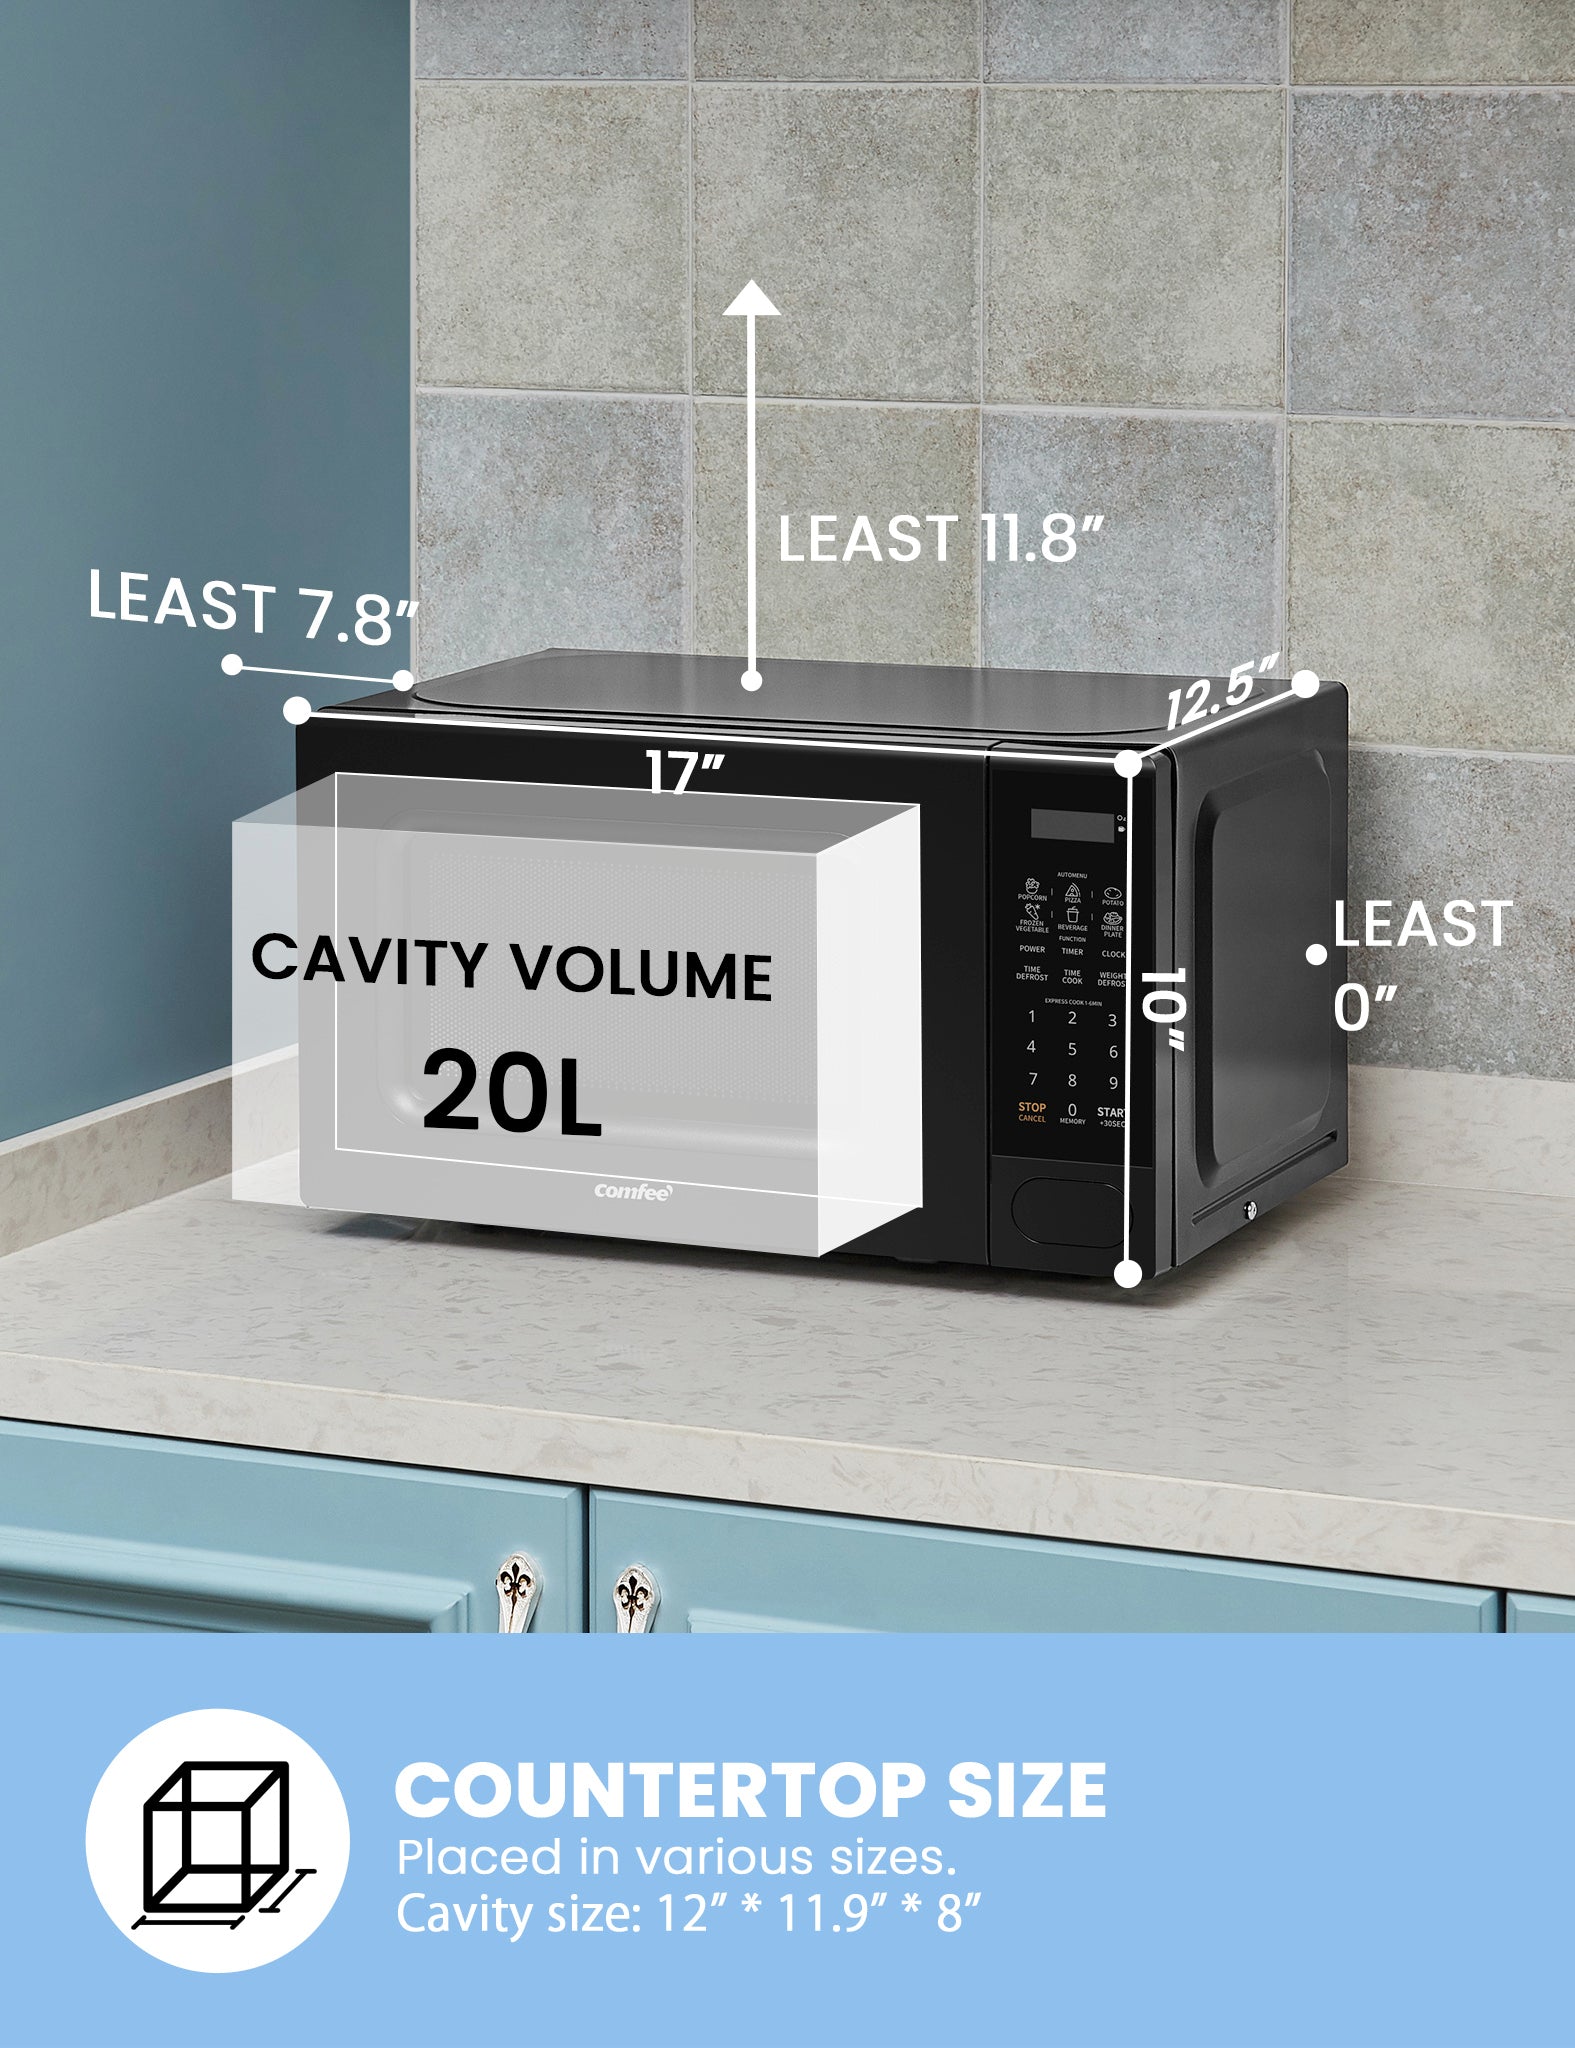 size dimensions of black comfee countertop microwave on a white patten kitchen countertop